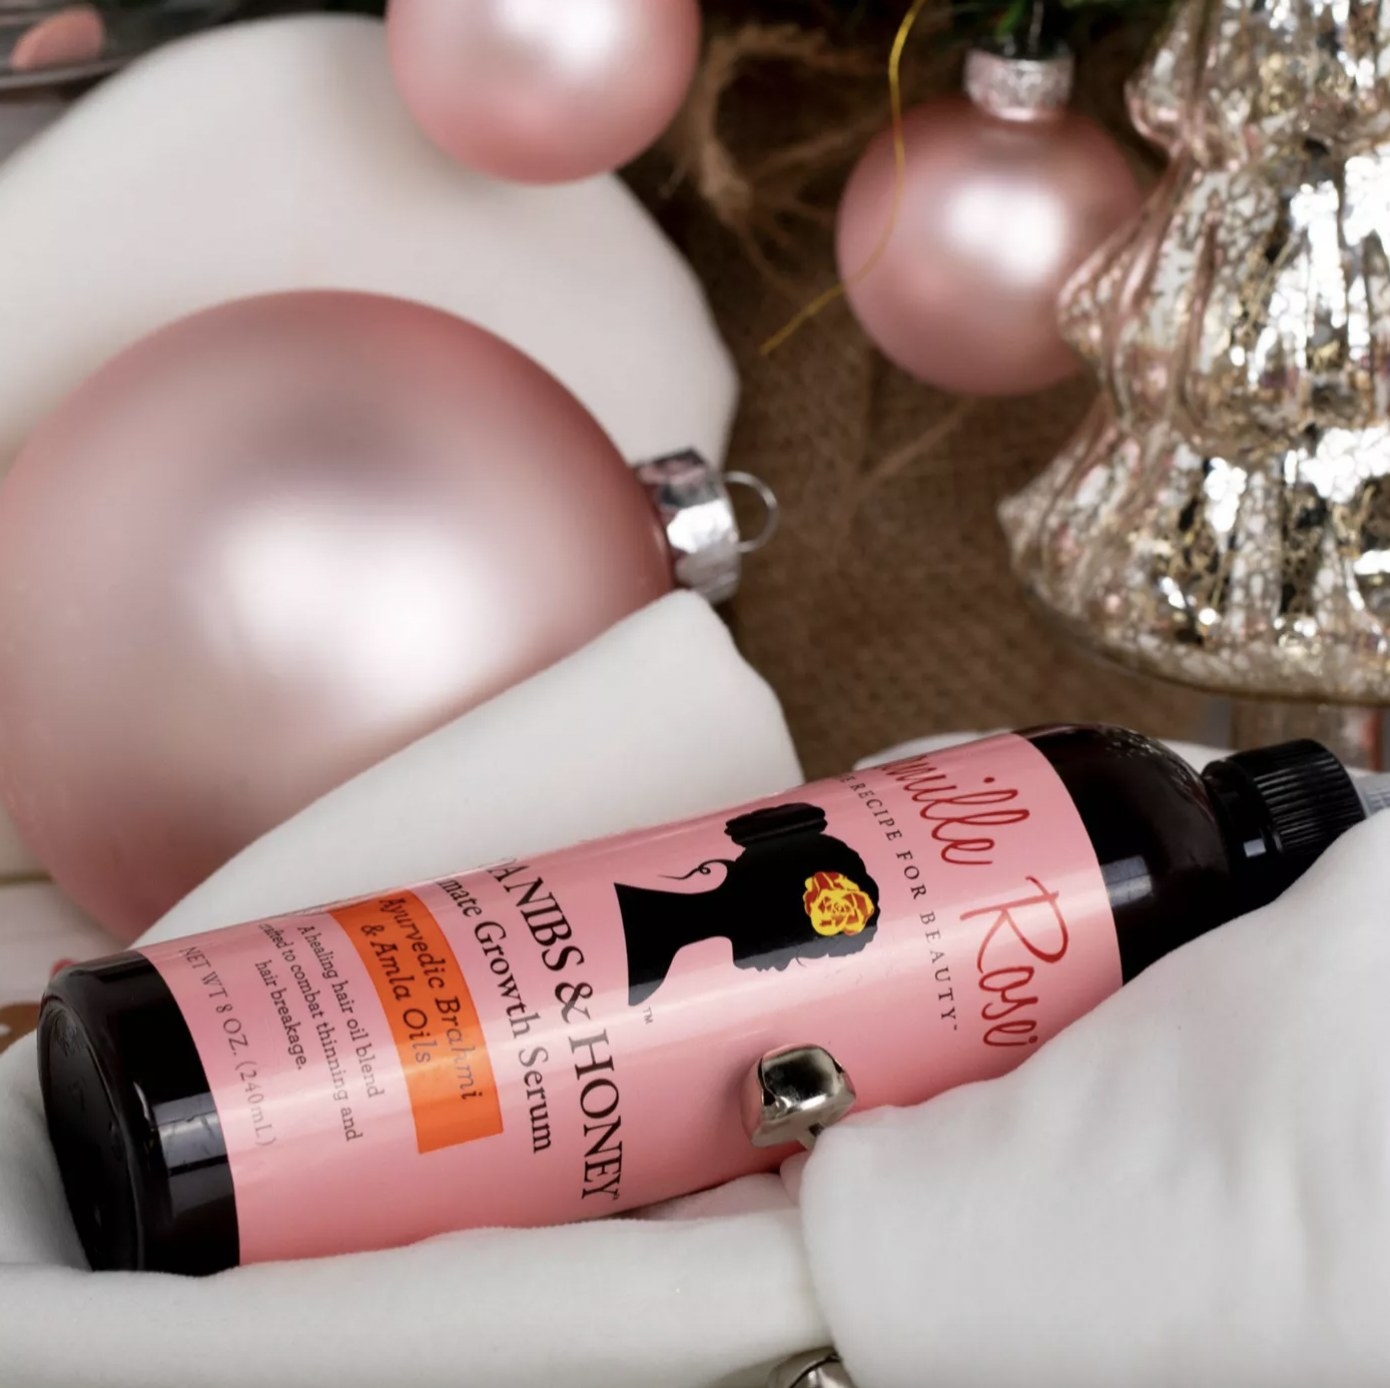 A bottle of hair oil and pink and white Christmas ornaments